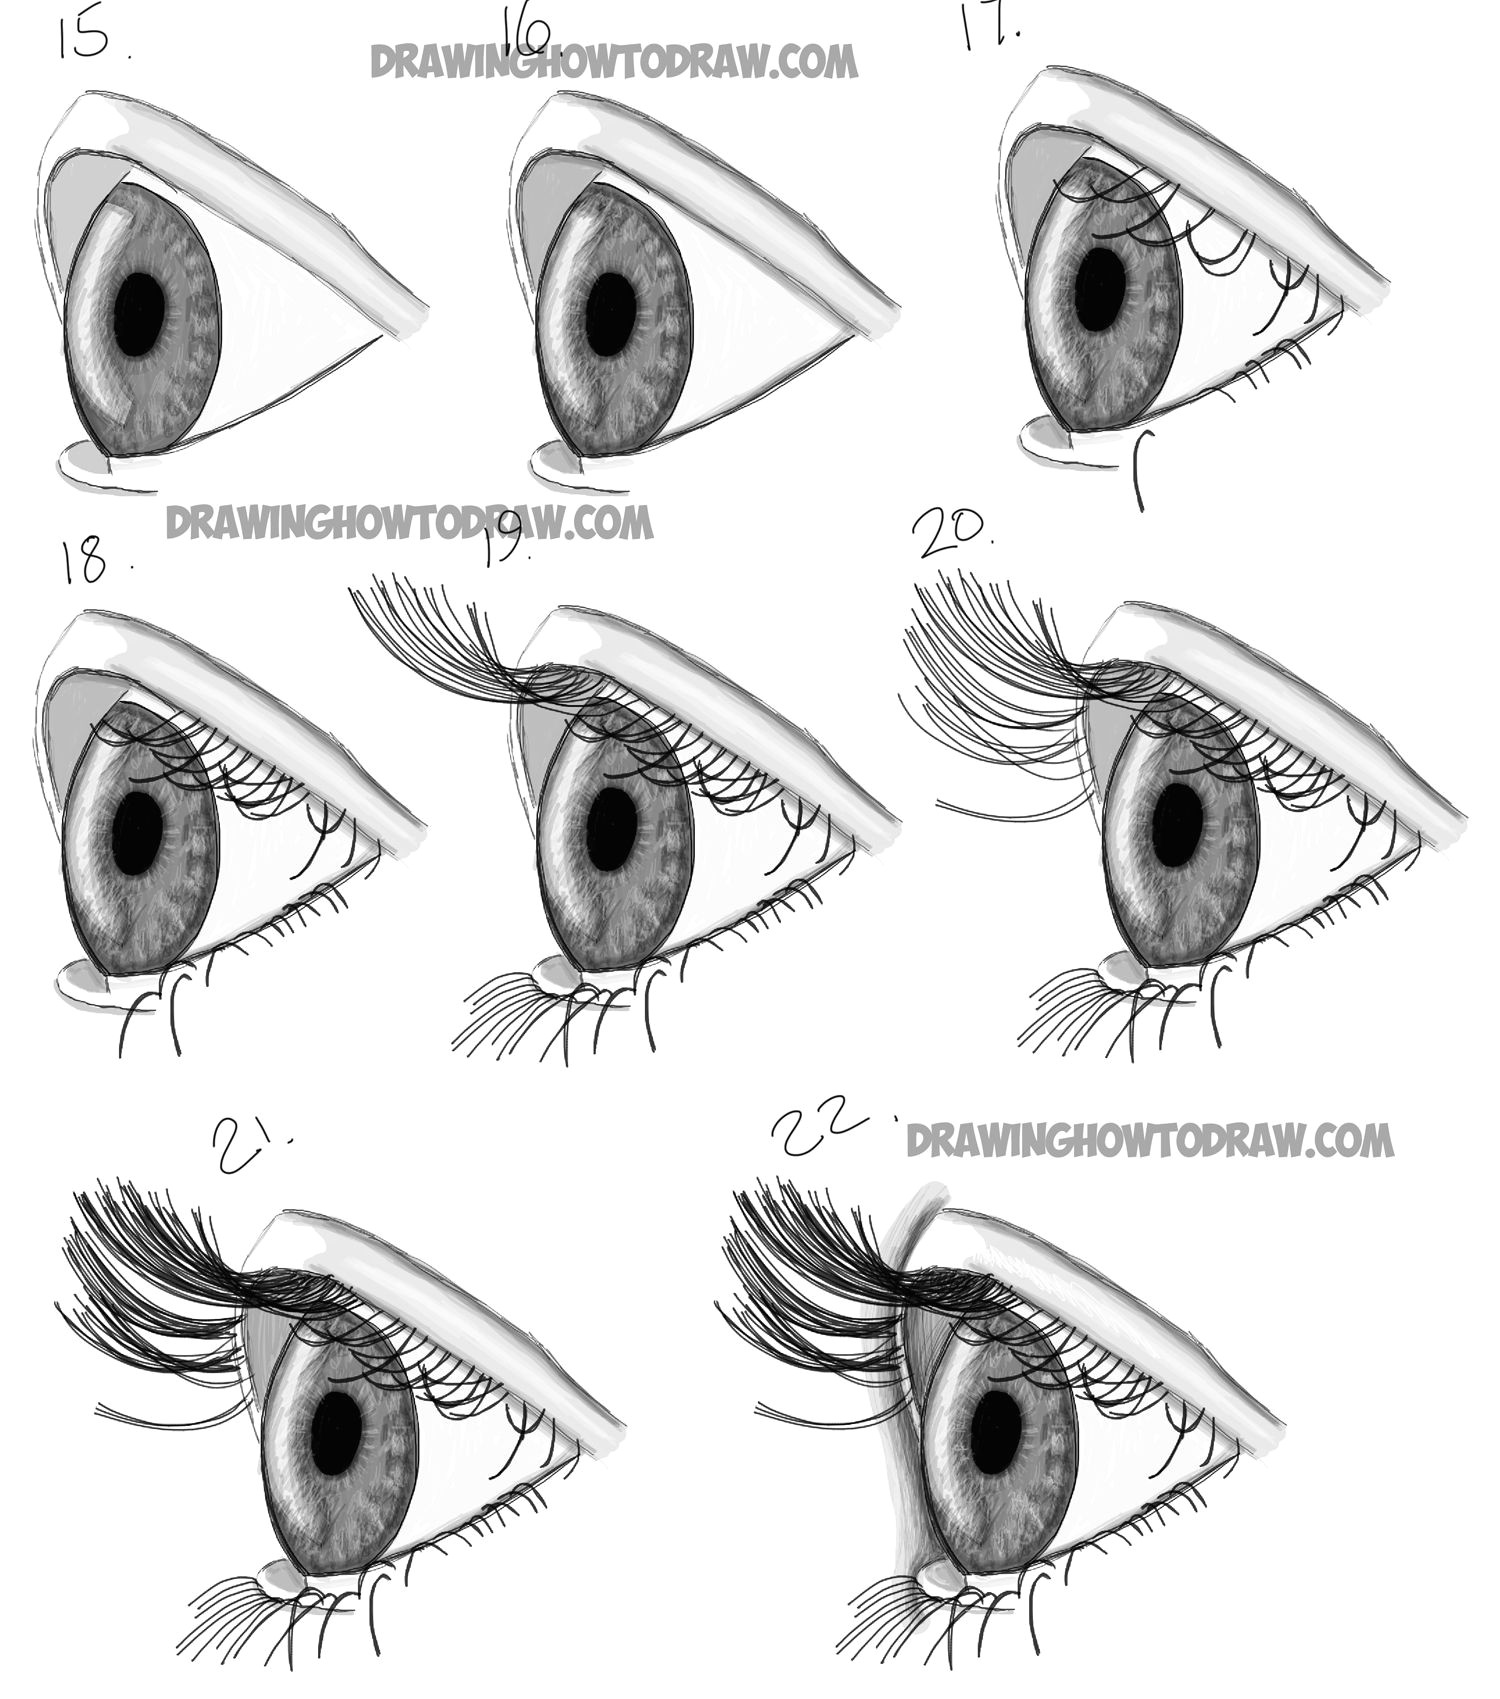 Drawing the Eyes Tips How to Draw Realistic Eyes From the Side Profile View Step by Step